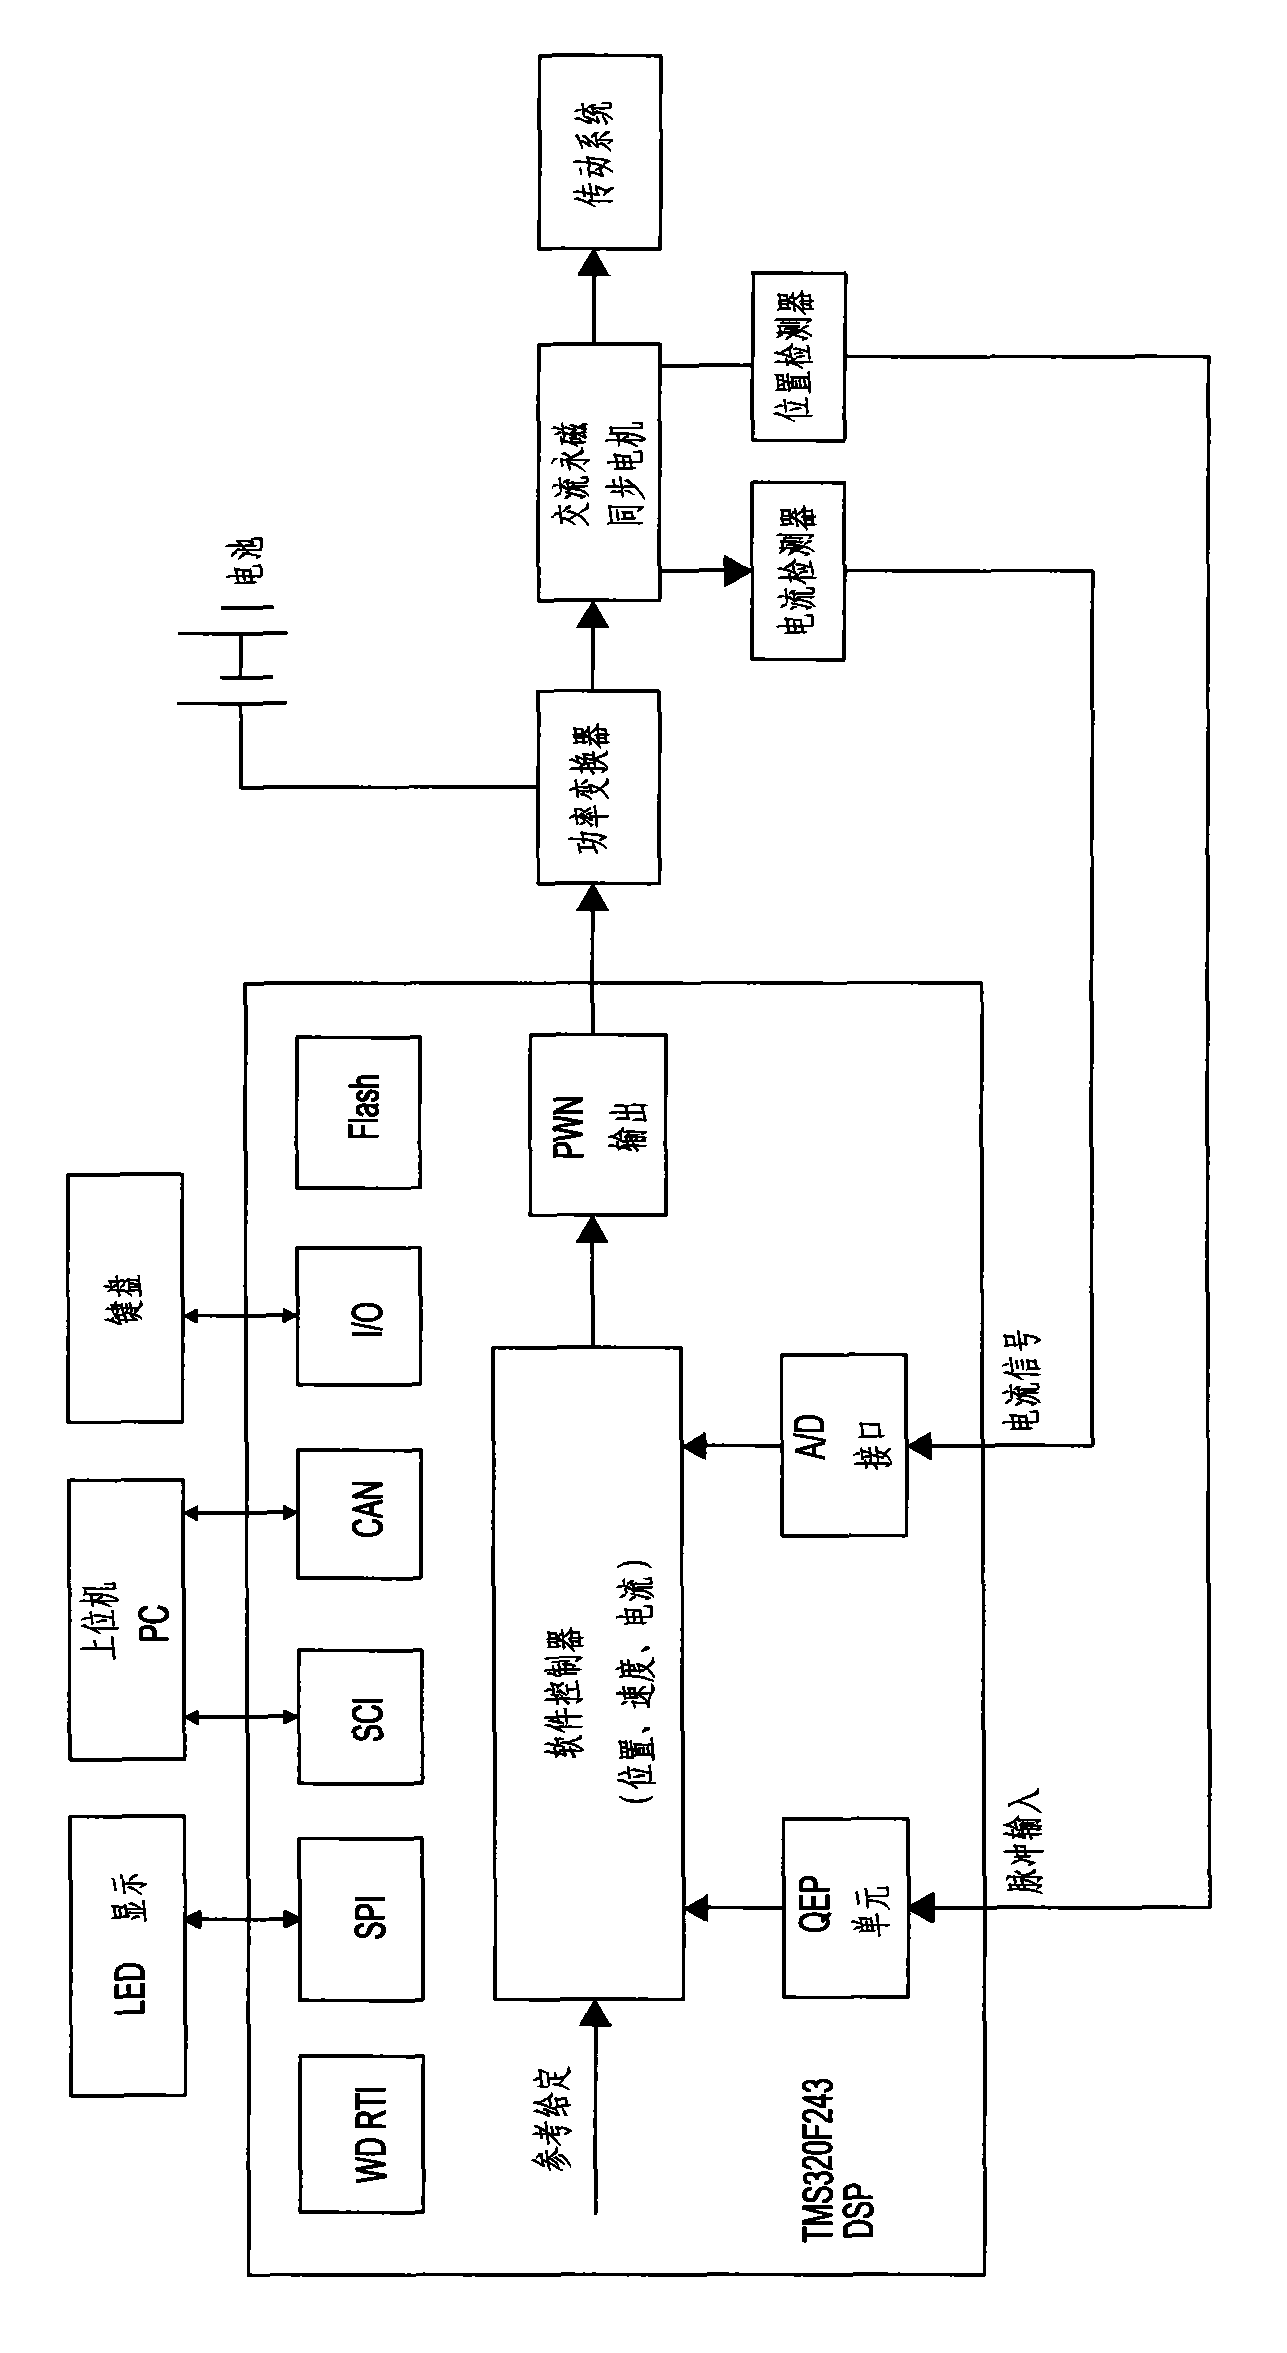 Alternating current permanent-magnet synchronous machine controller